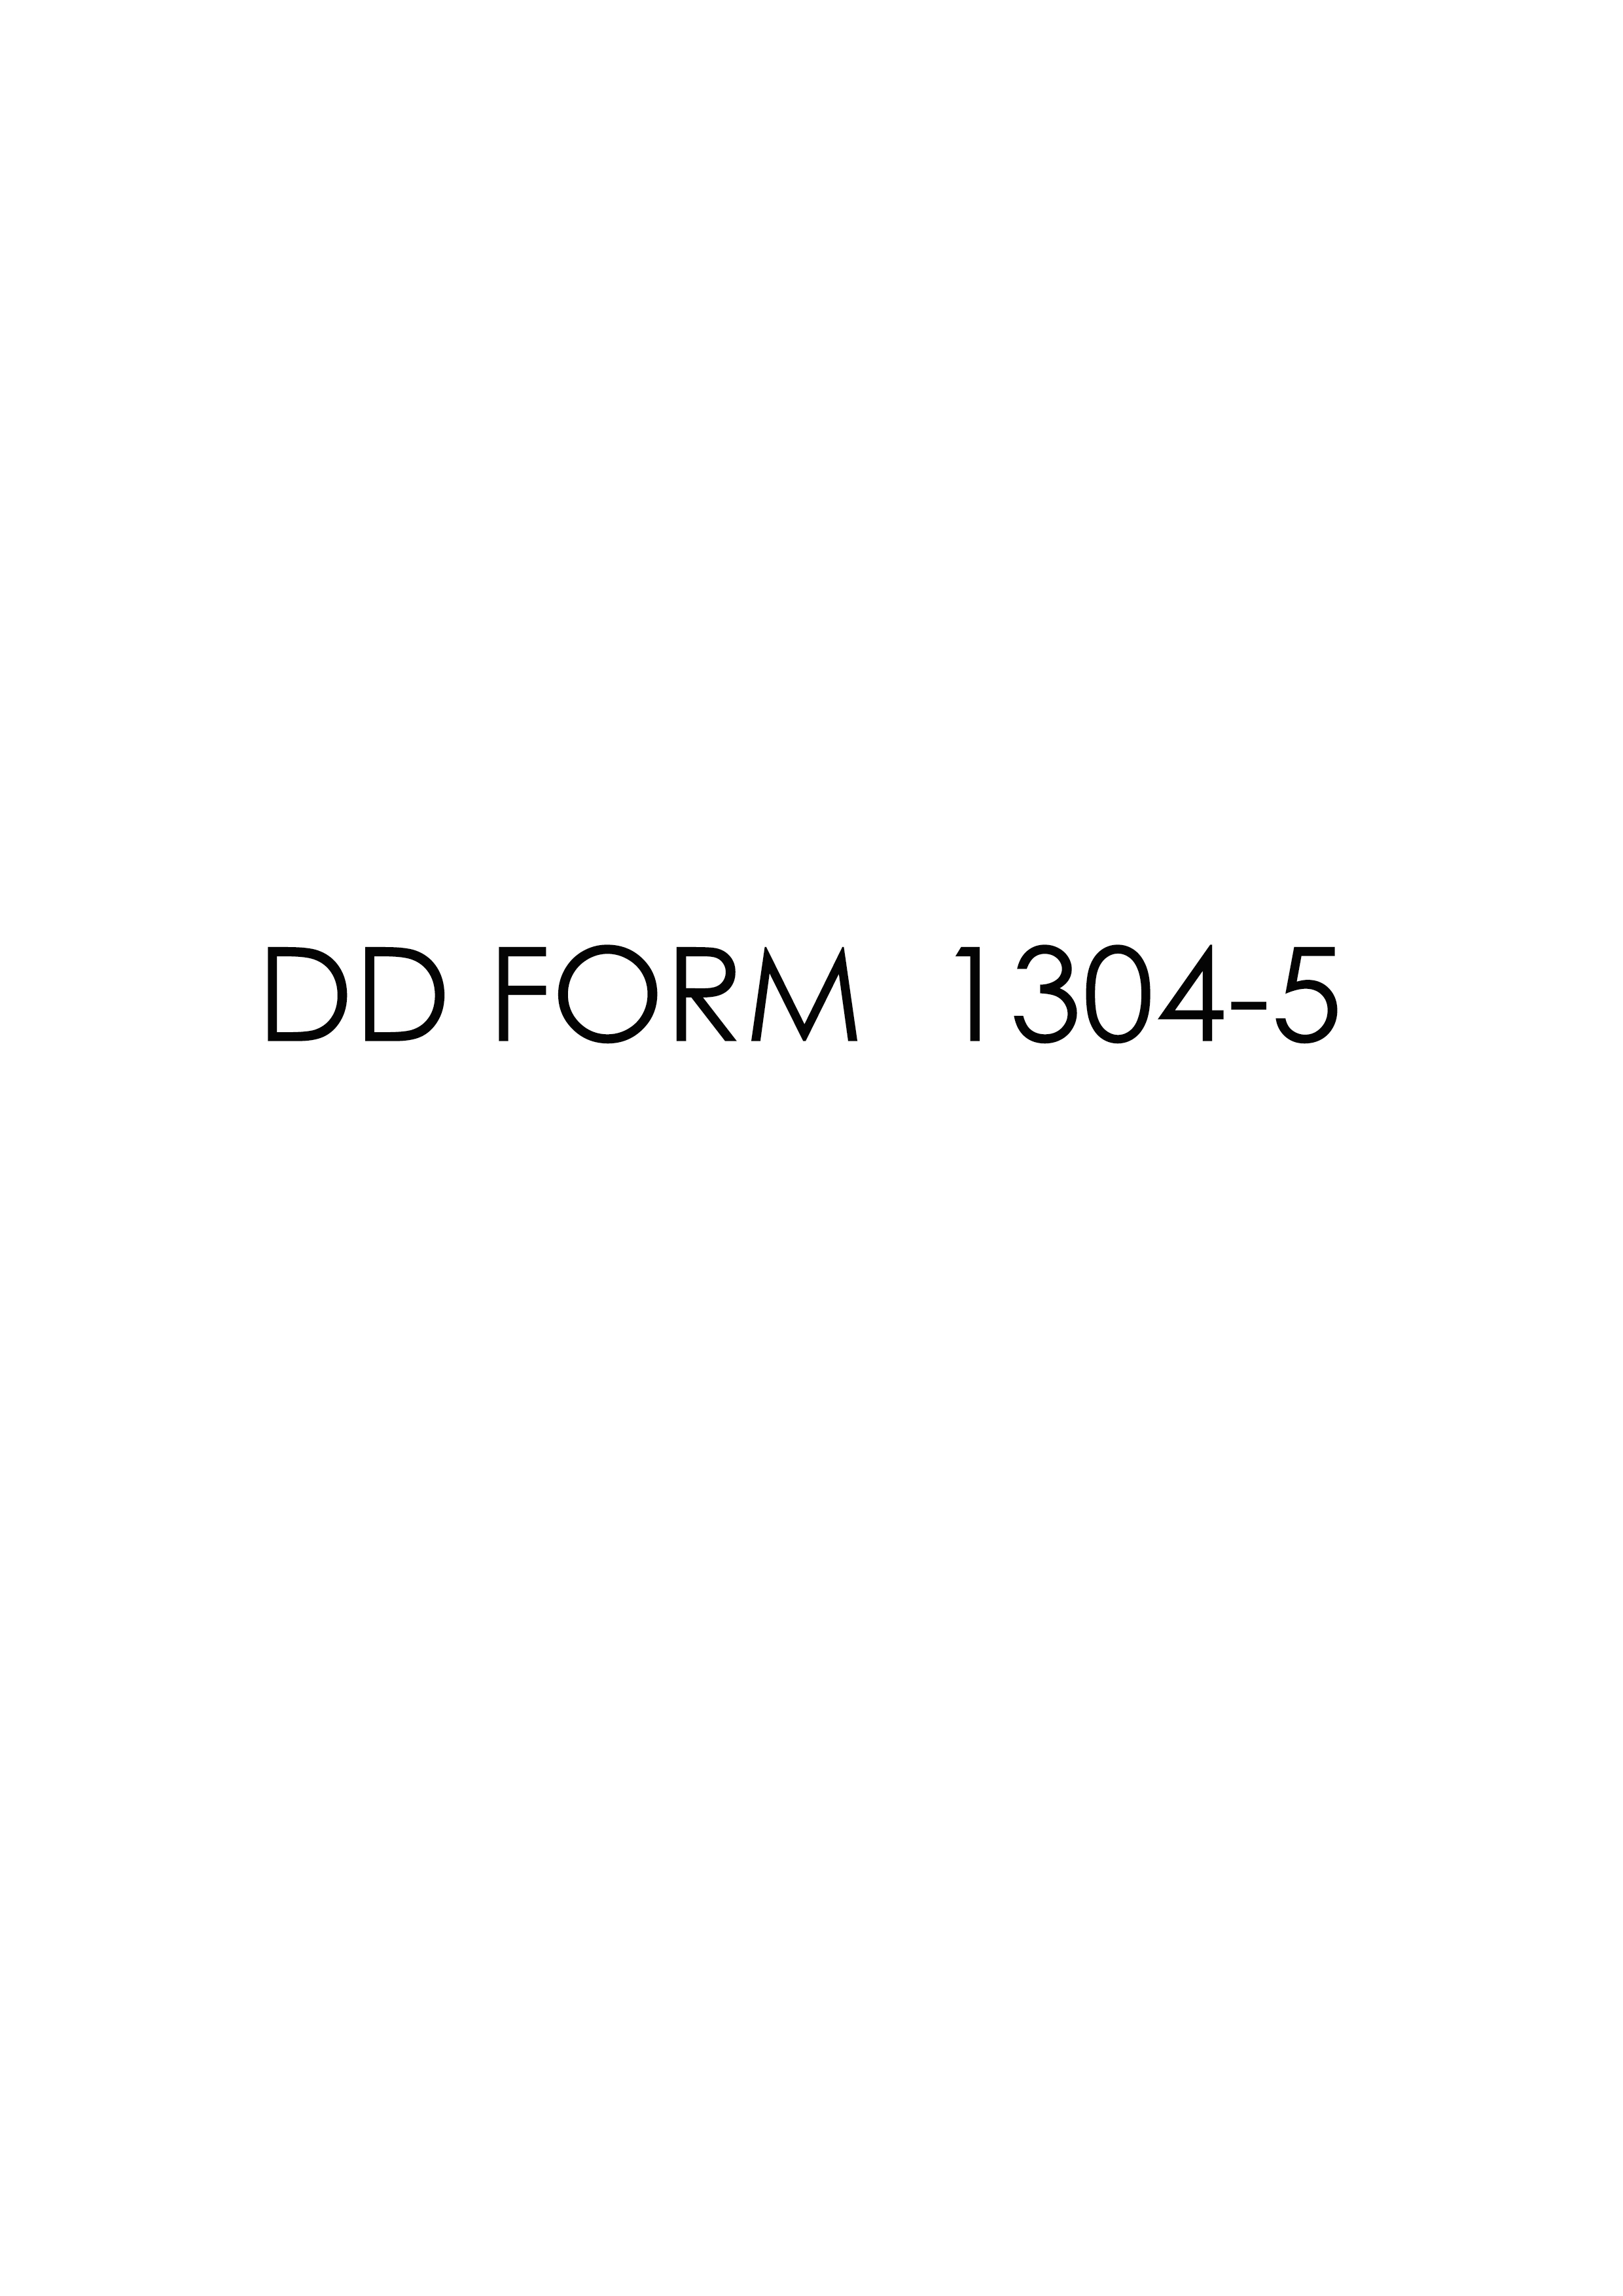 Download Fillable dd Form 1304-5